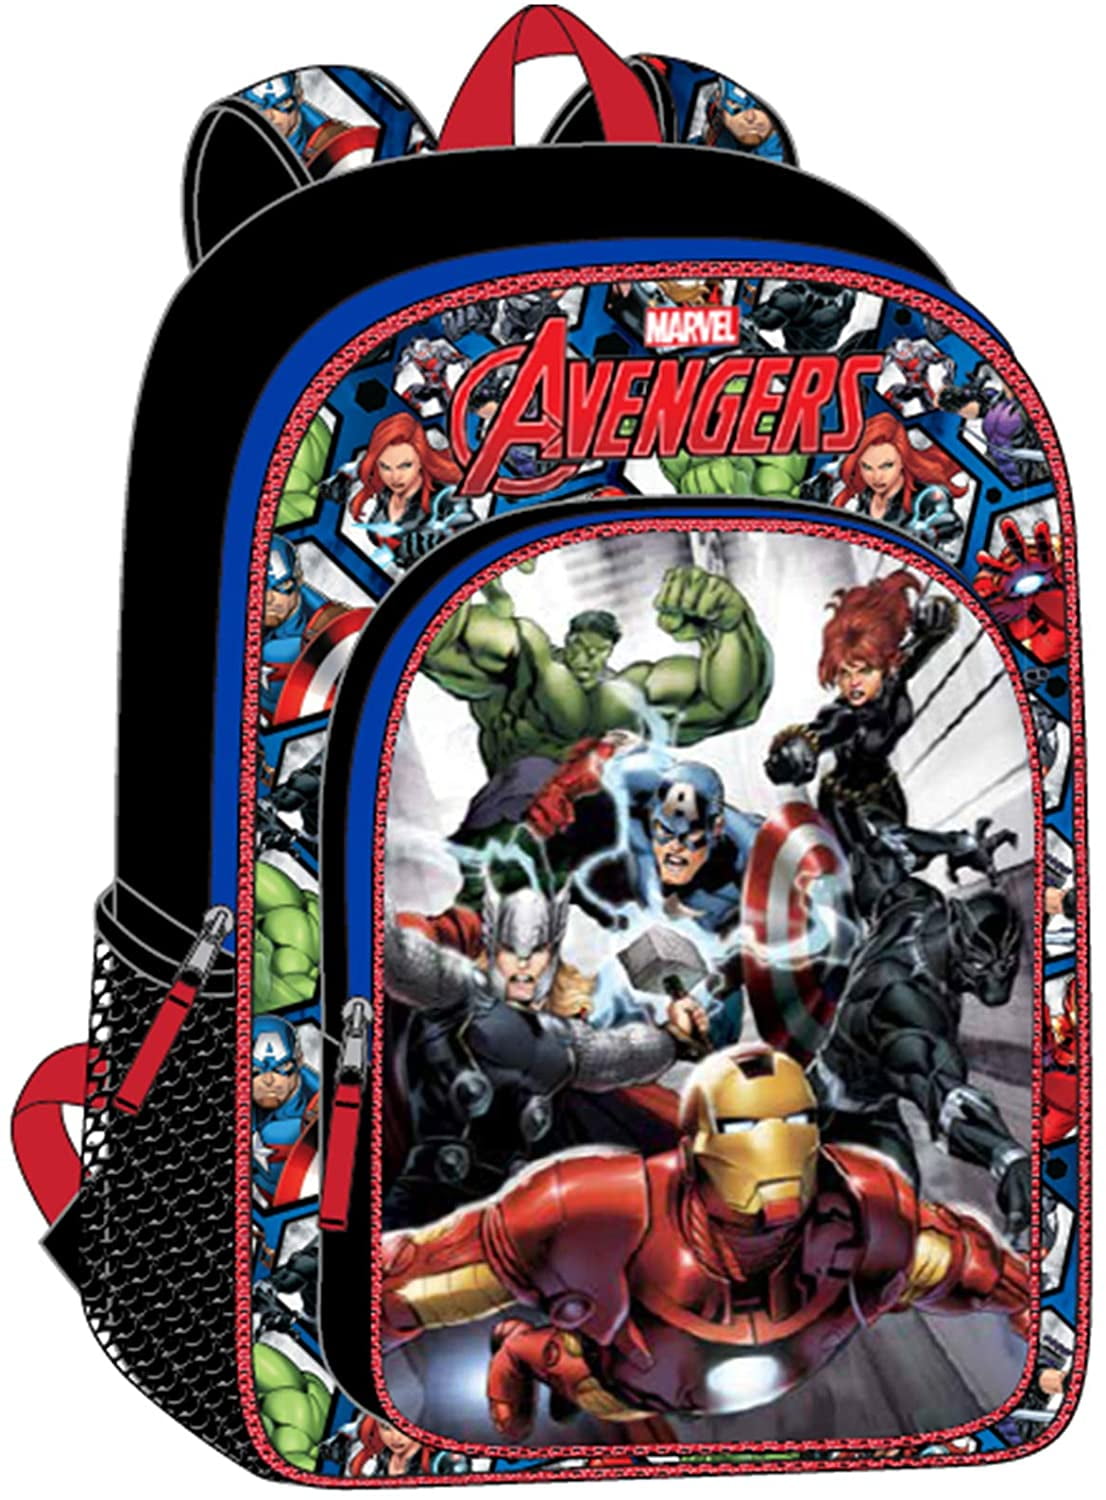 2018 Mavel Avengers Infinity War 16 inches Large Backpack 